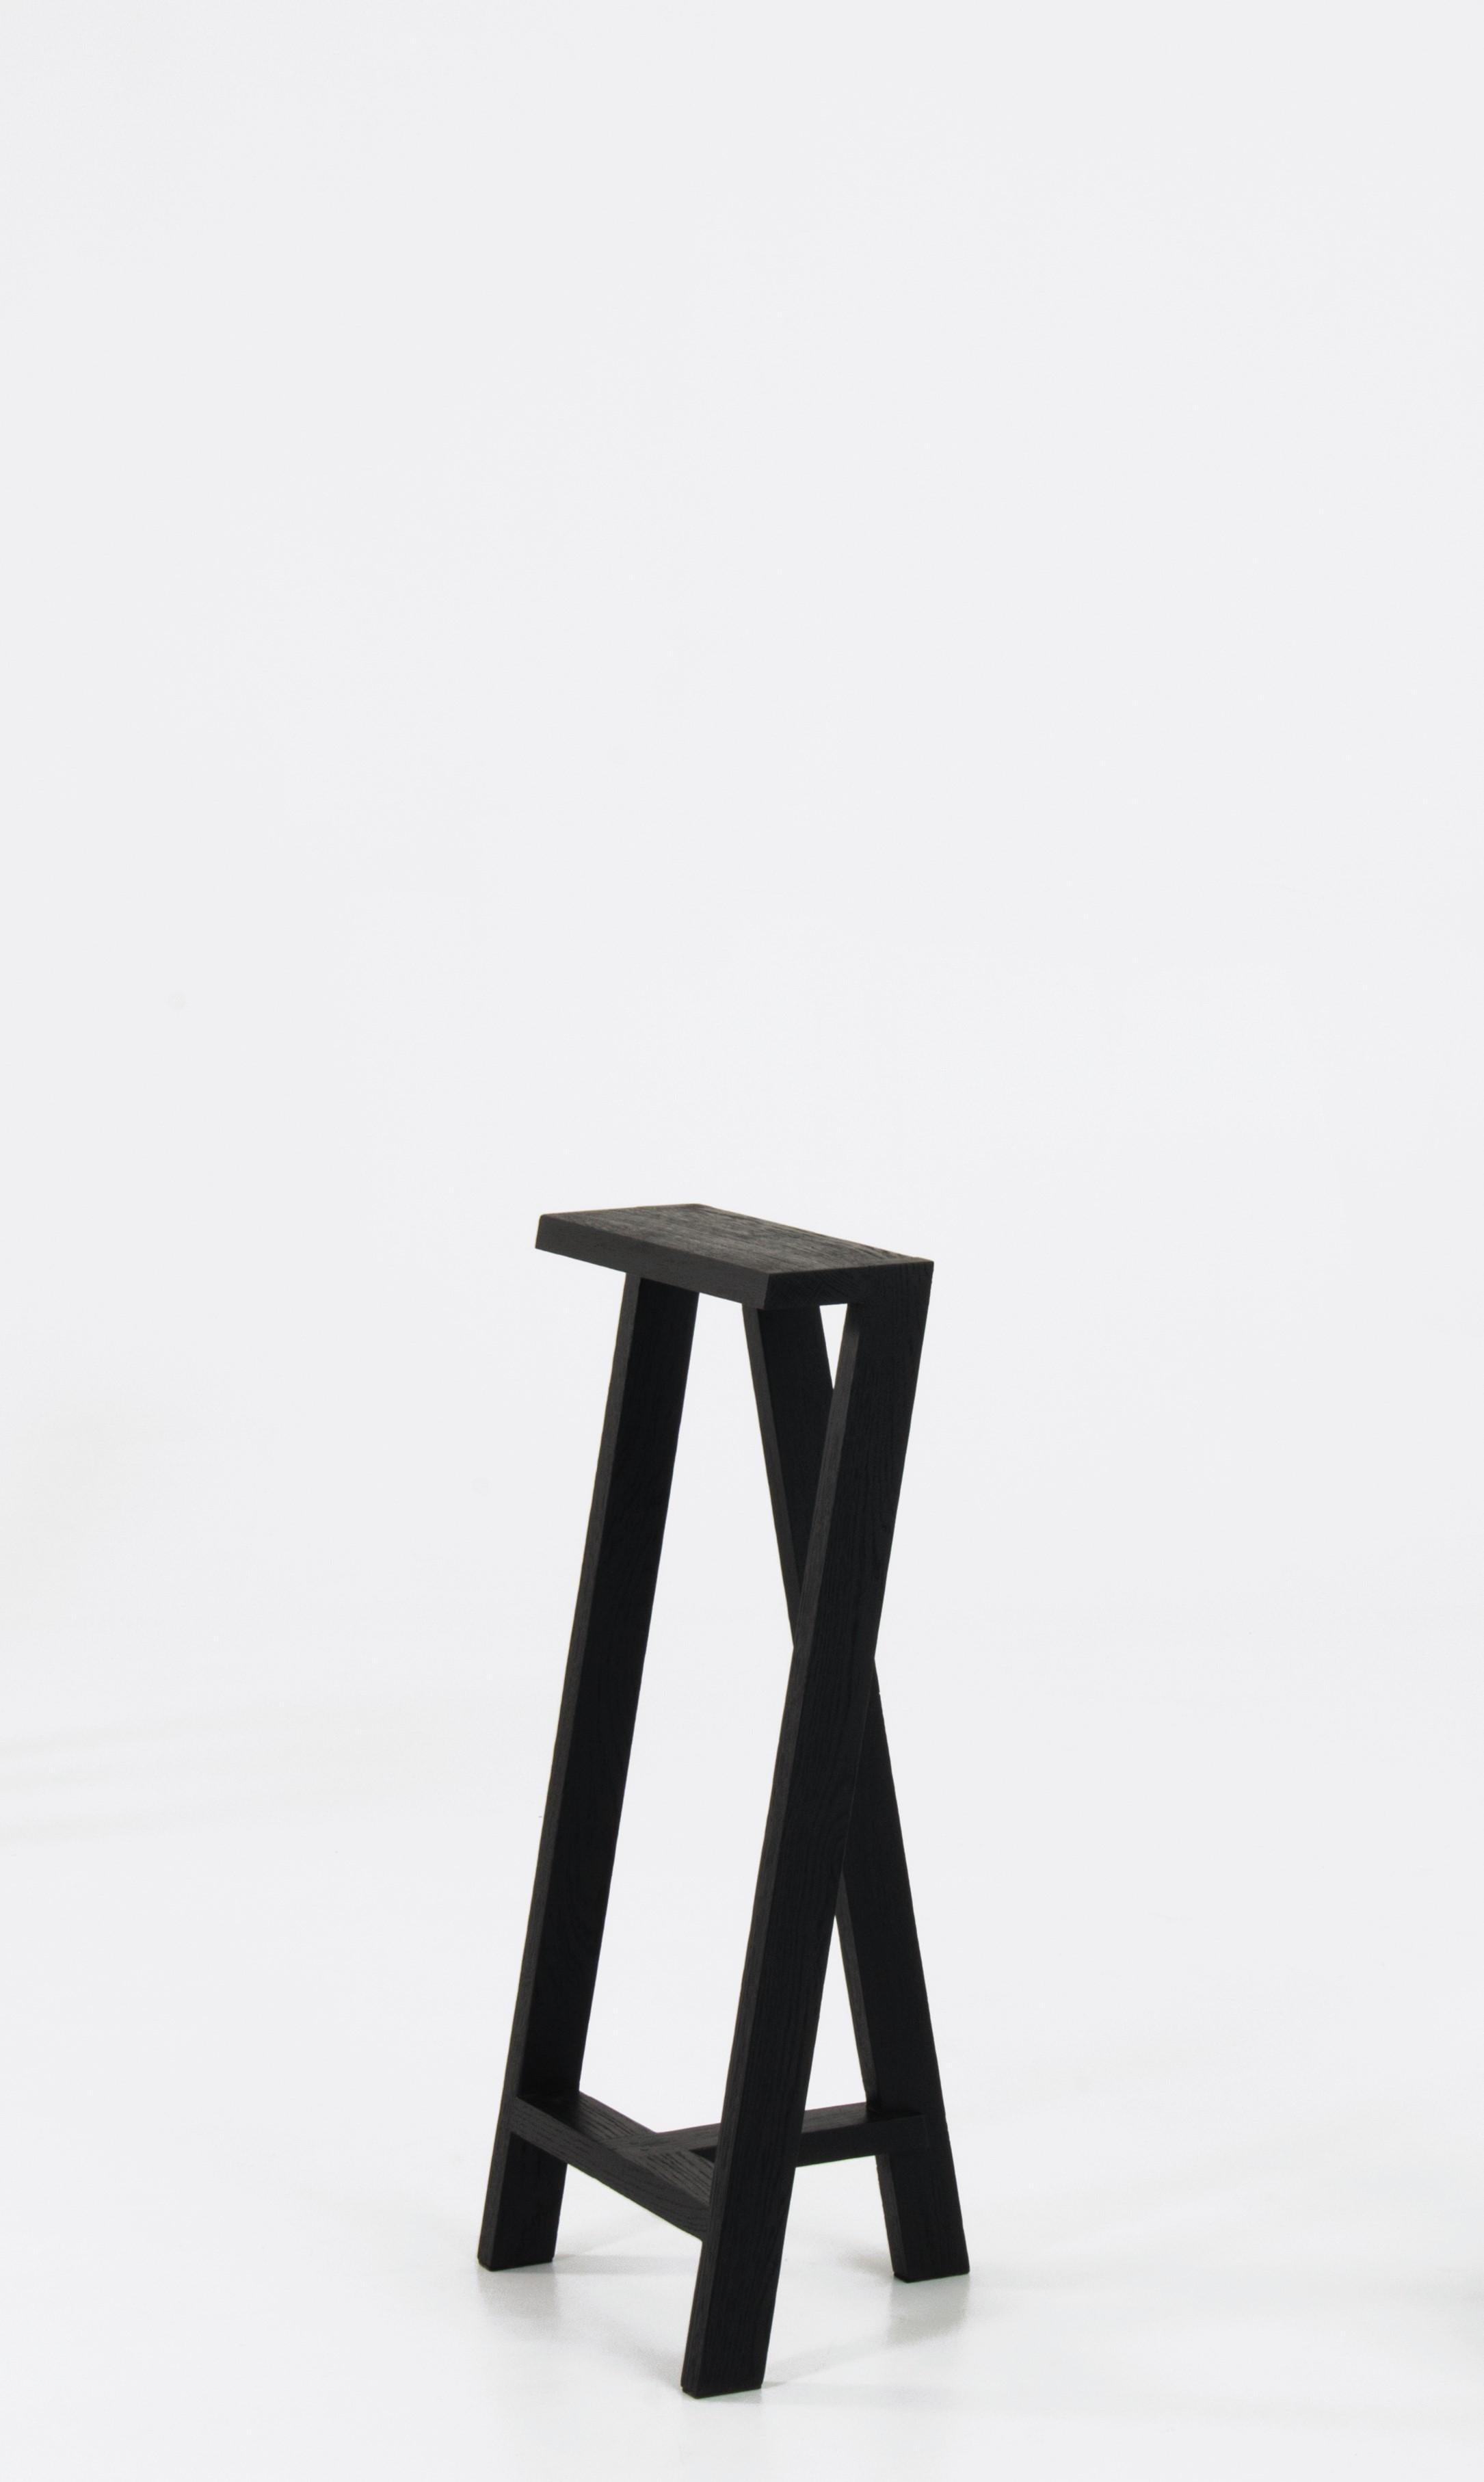 Large Pausa oak stool by Pierre-Emmanuel Vandeputte
Dimensions: D 35 x W 35 x H 75 cm.
Materials: Burned Oak.
Available in natural oak version and in 3 sizes.

Pausa is a series of stools; 45cm, 65cm, or 75cm of assembled oak pieces. 
The